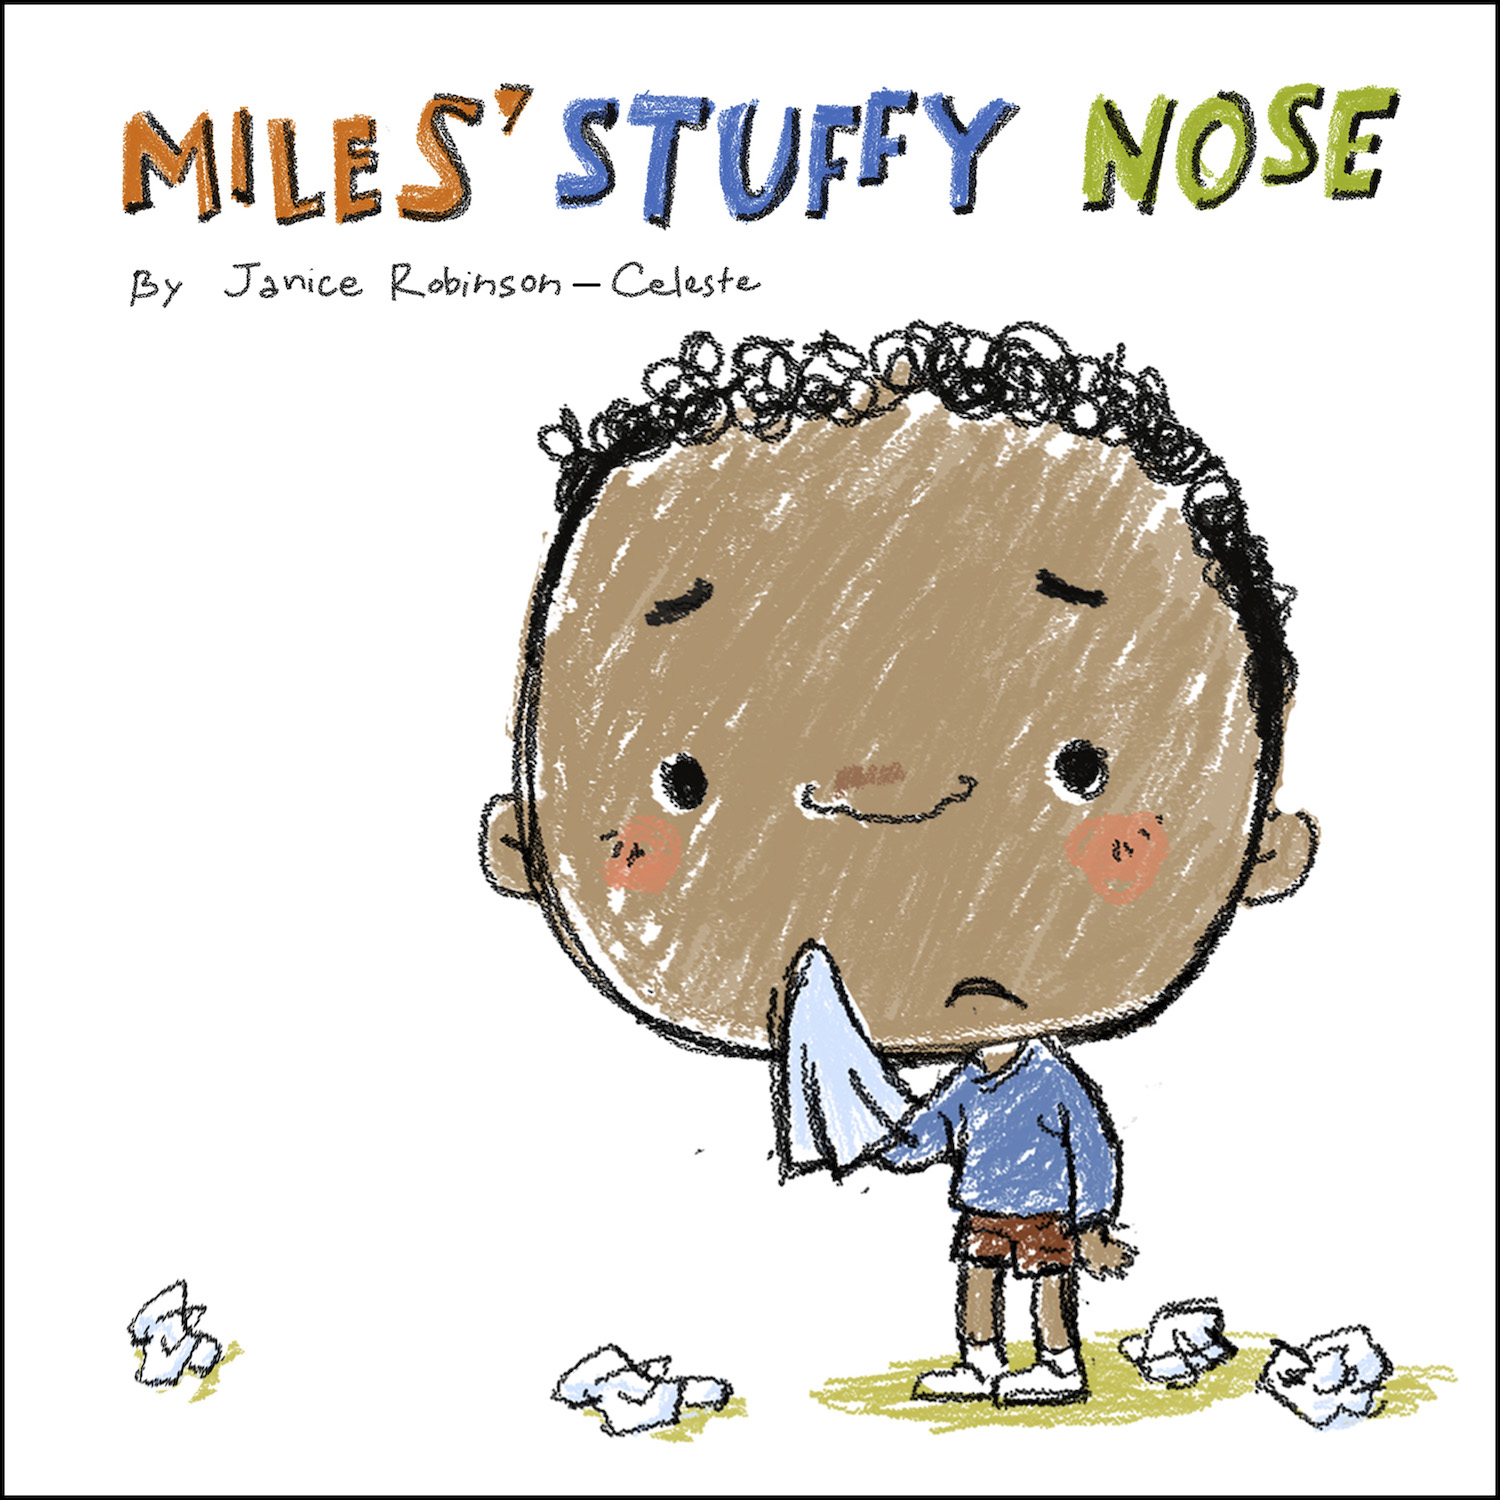 Miles-Stuffy-Nose-Cover-w-Outline-SM-cop